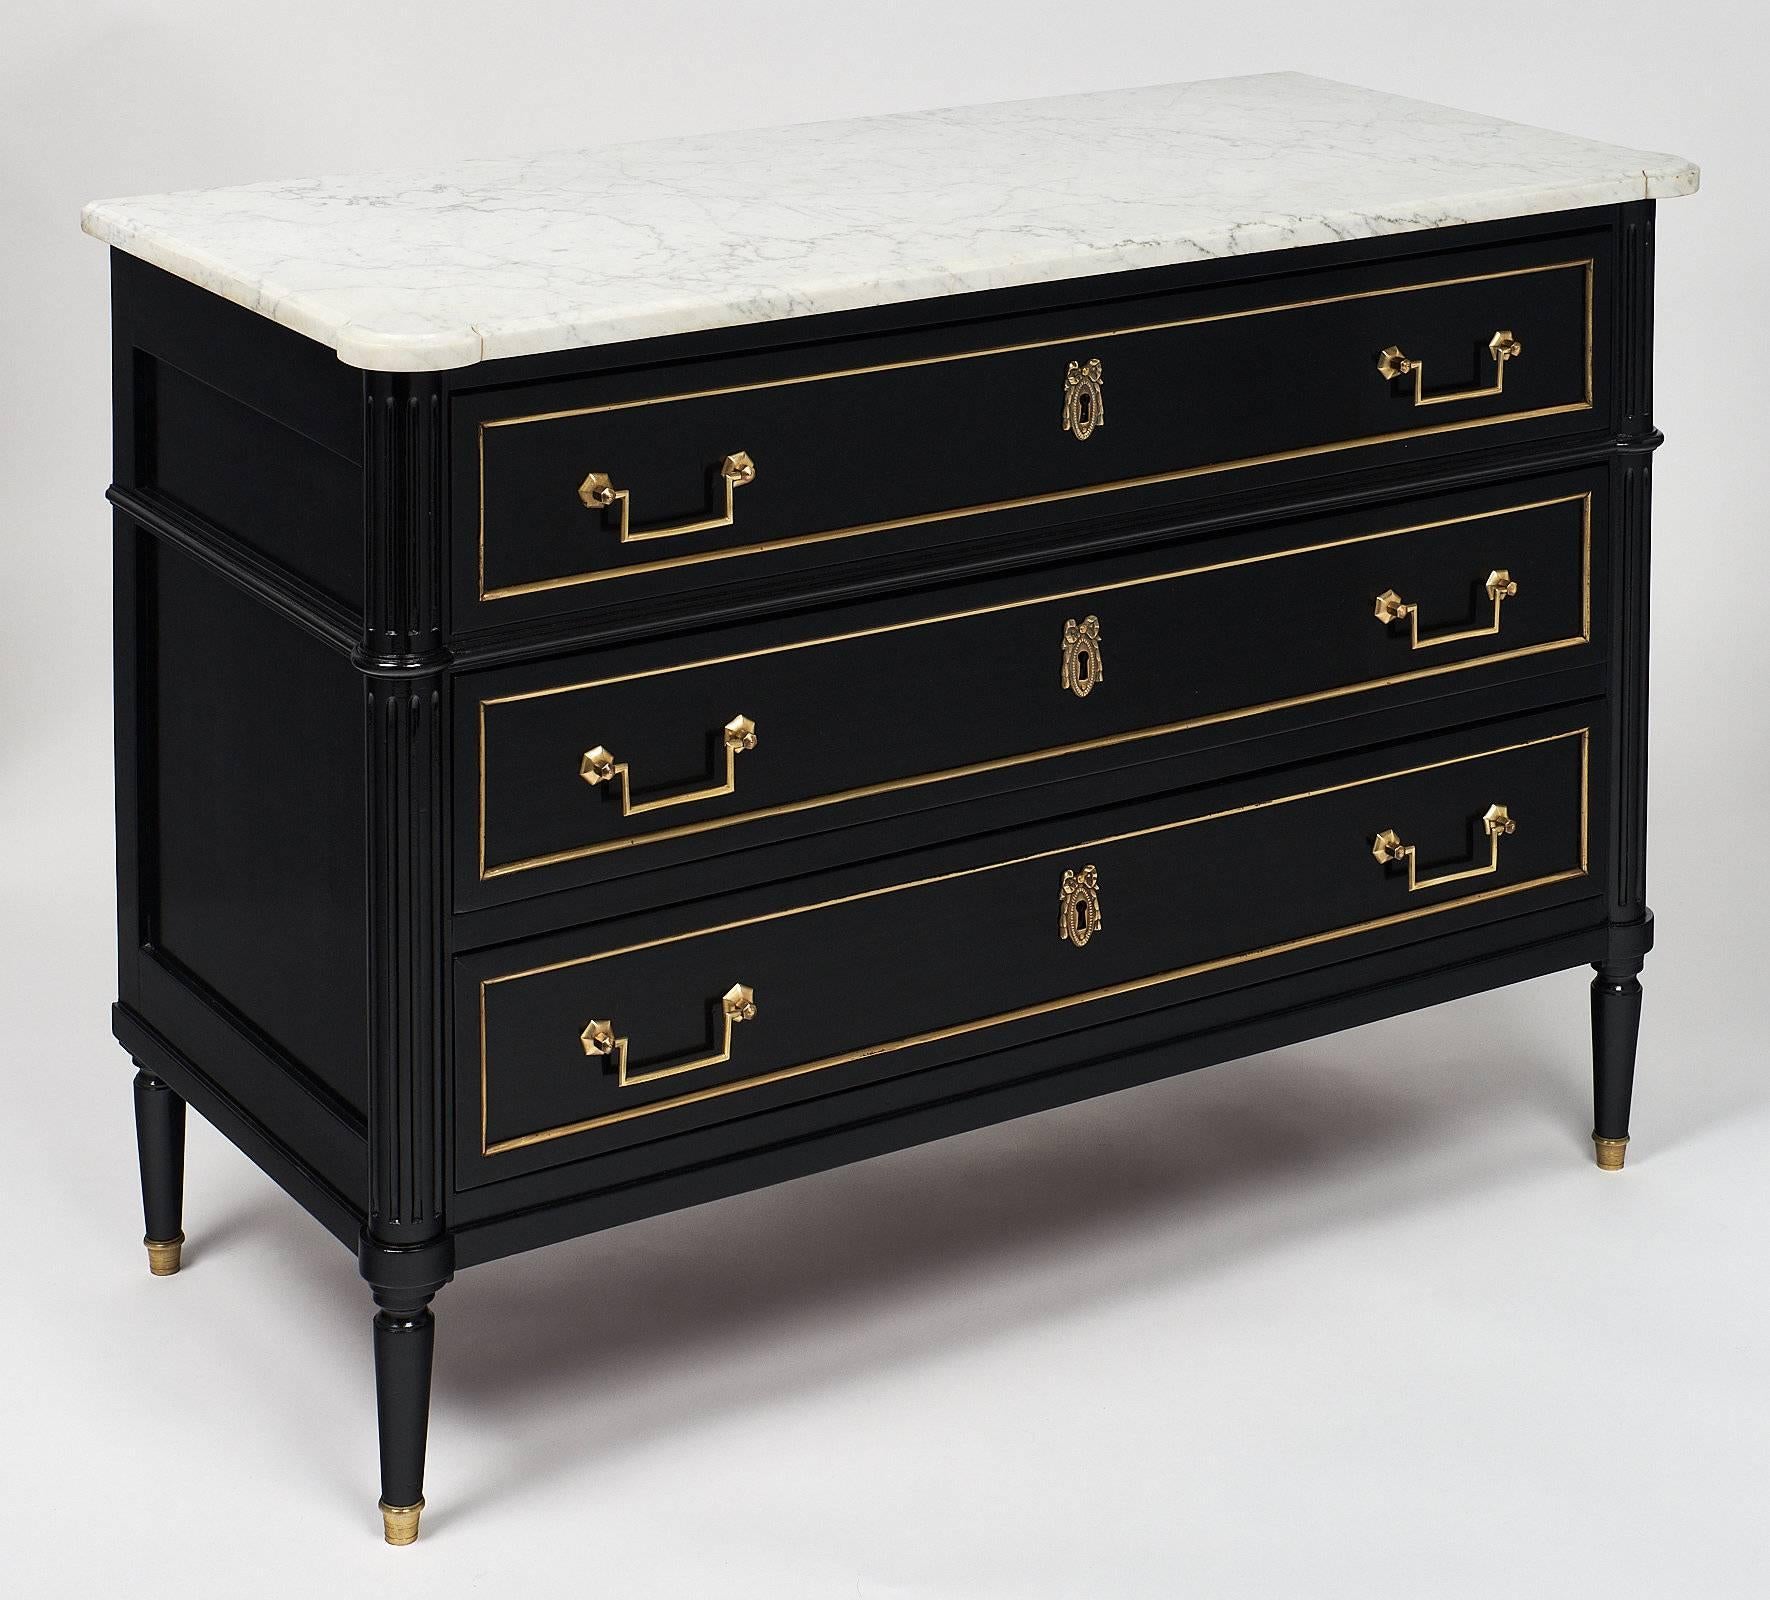 Louis XVI style French antique chest of drawers or “commode”. It features an intact Carrara marble top and three dovetailed drawers with gilt brass handles and hardware. We love the hand-carved fluted details. It is made of mahogany with oak as a